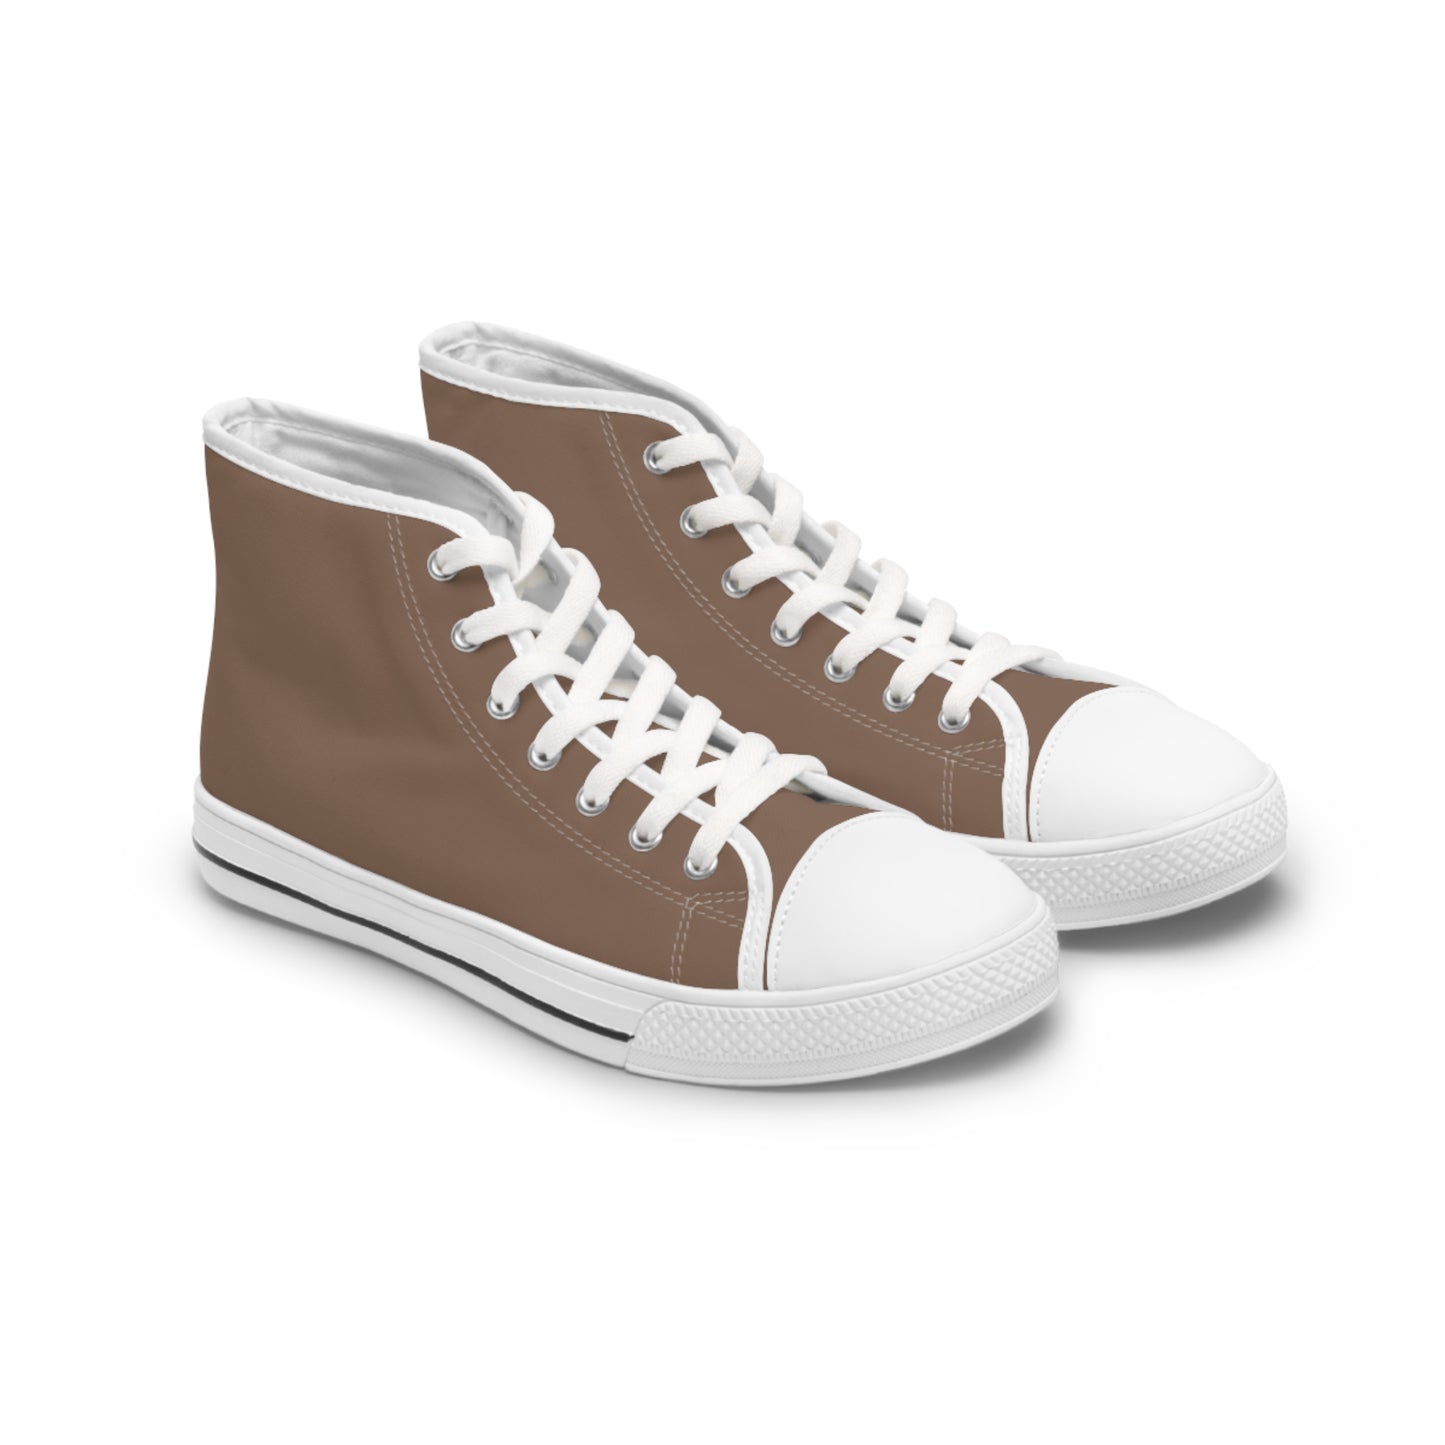 Women's Canvas High Top Solid Color Sneakers - Latte Tan US 12 White sole